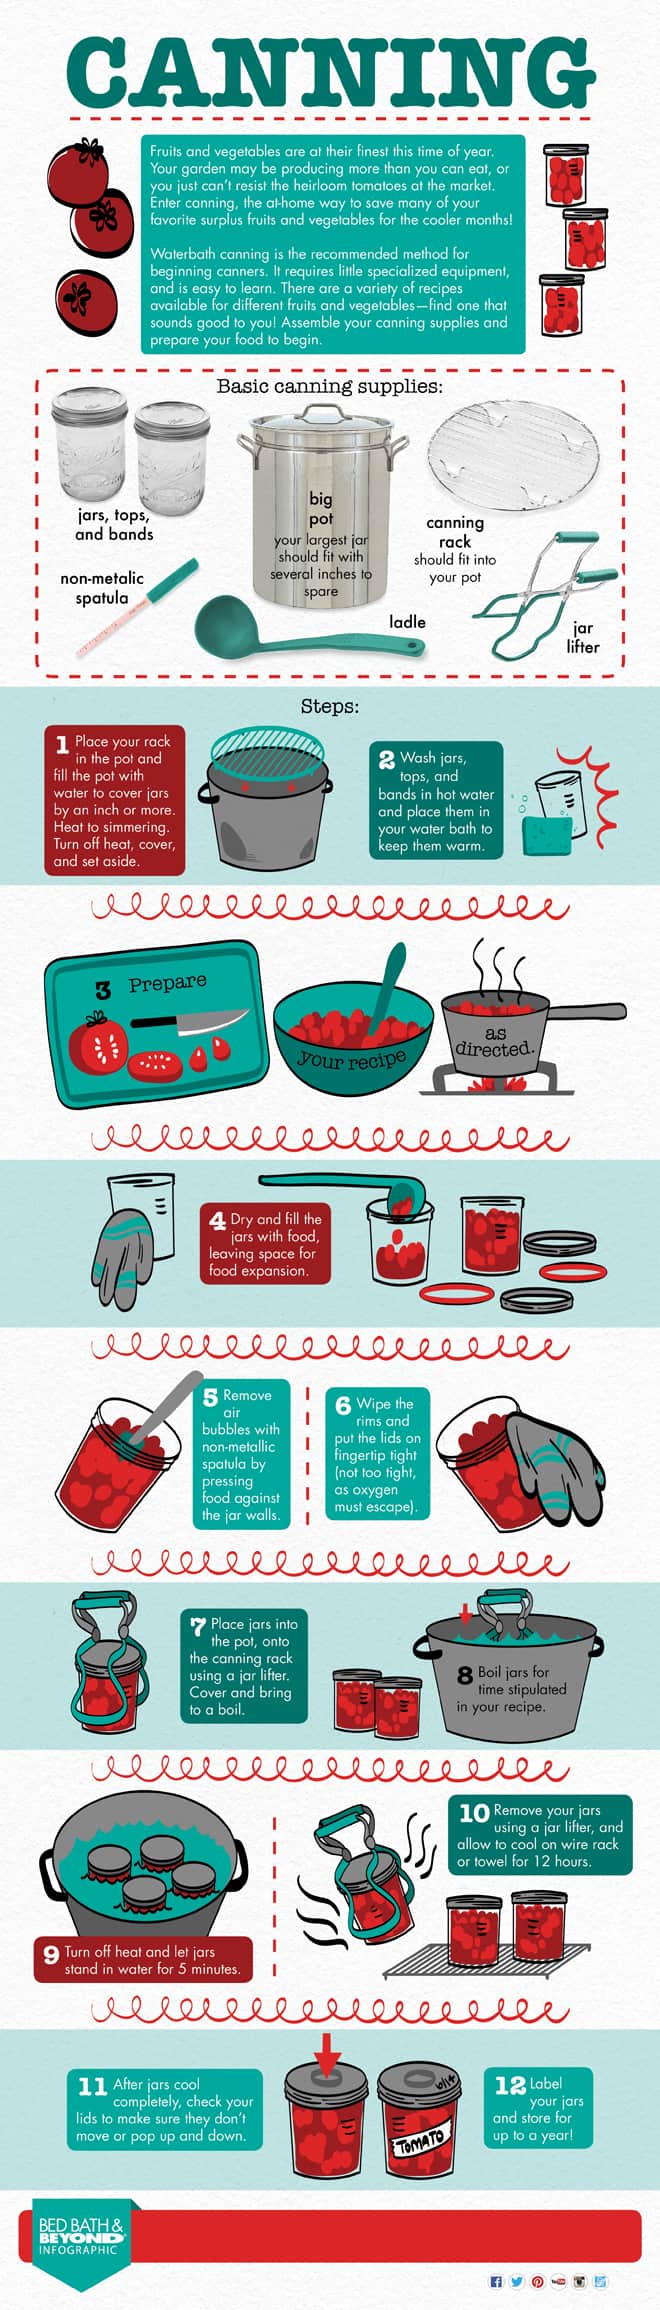 Essential canning supplies and canning basics infographic